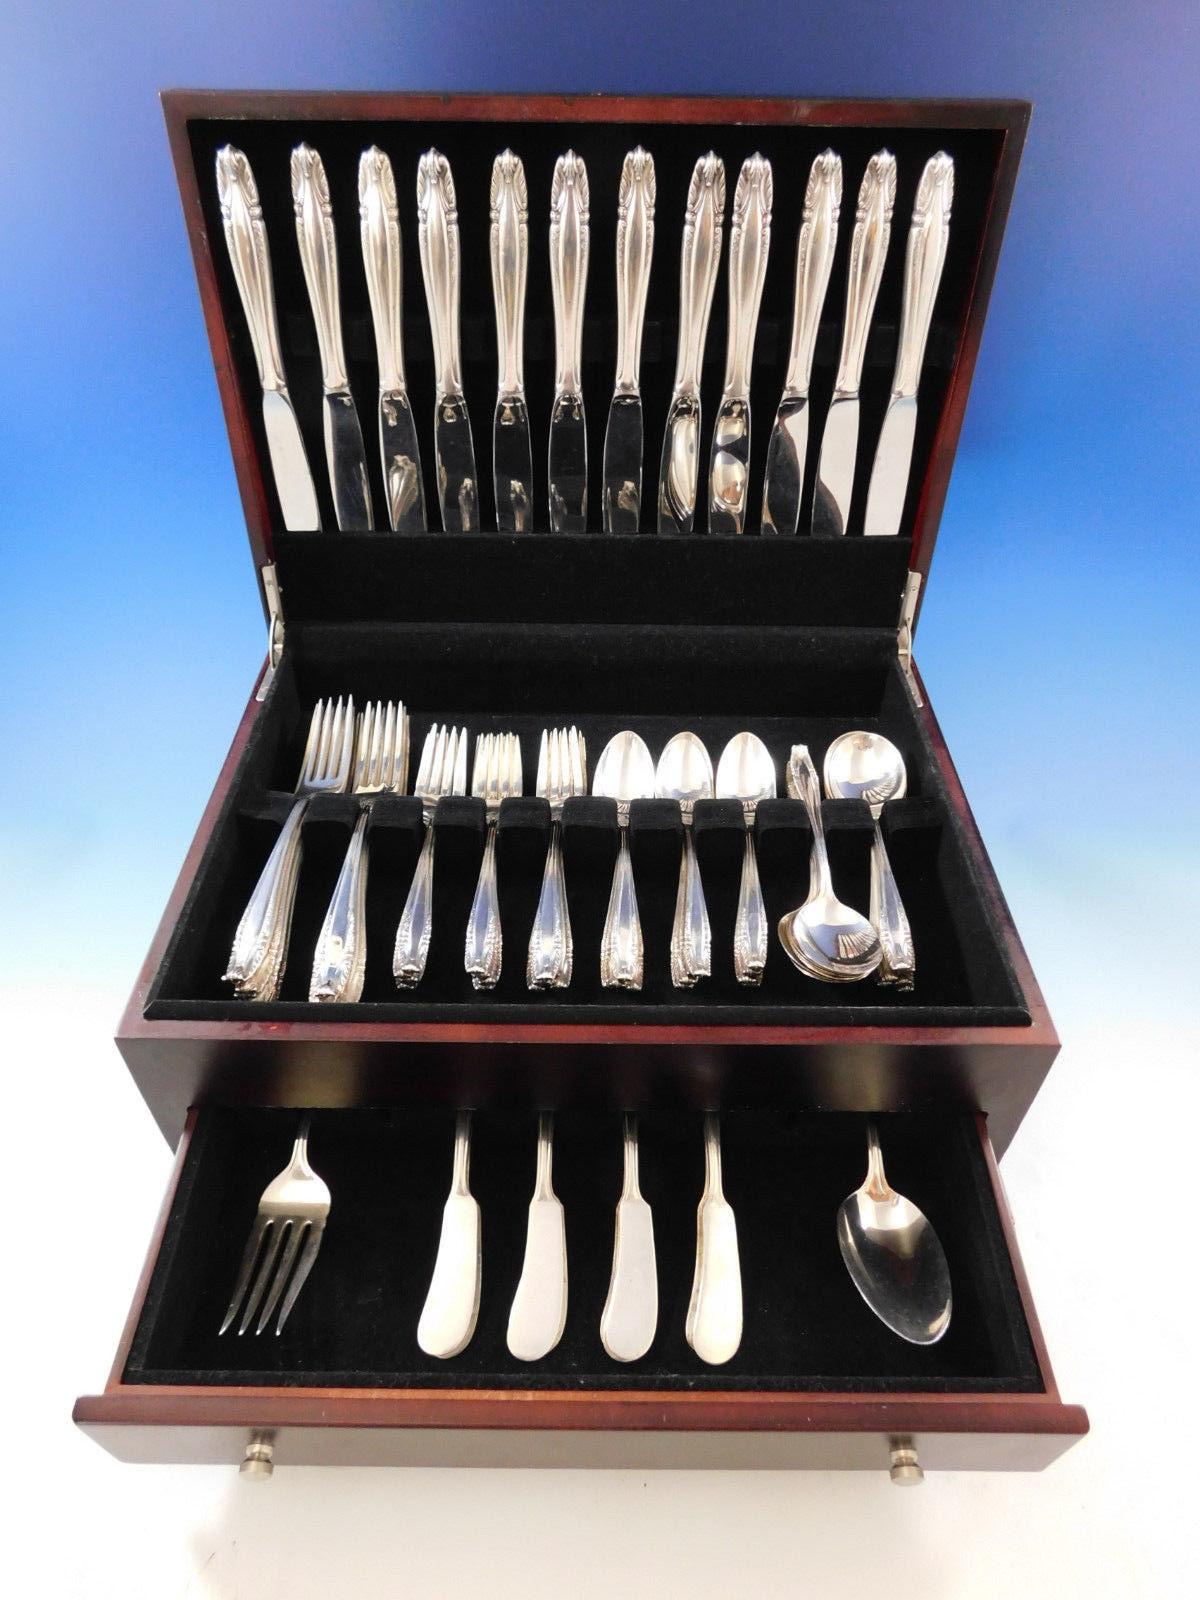 Stradivari by Wallace sterling silver dinner size flatware set - 74 pieces. This set includes:

12 dinner size knives, 9 3/4